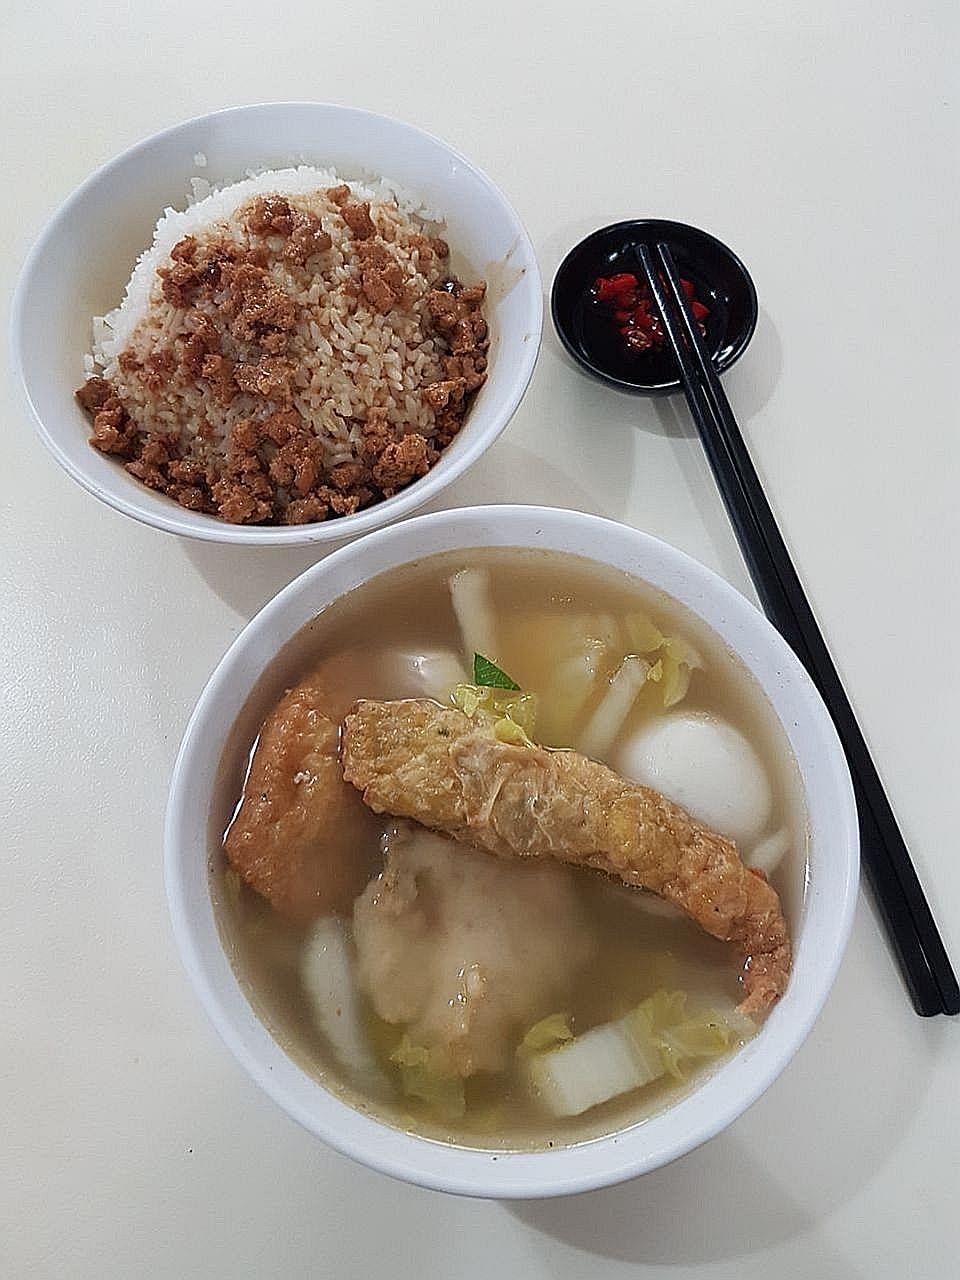 Long Hua's hearty Hakka Yong Tau Foo set comes with stuffed bittergourd, meat-filled tofu, fishball, meat fritter, tau kwa and rice or noodles.